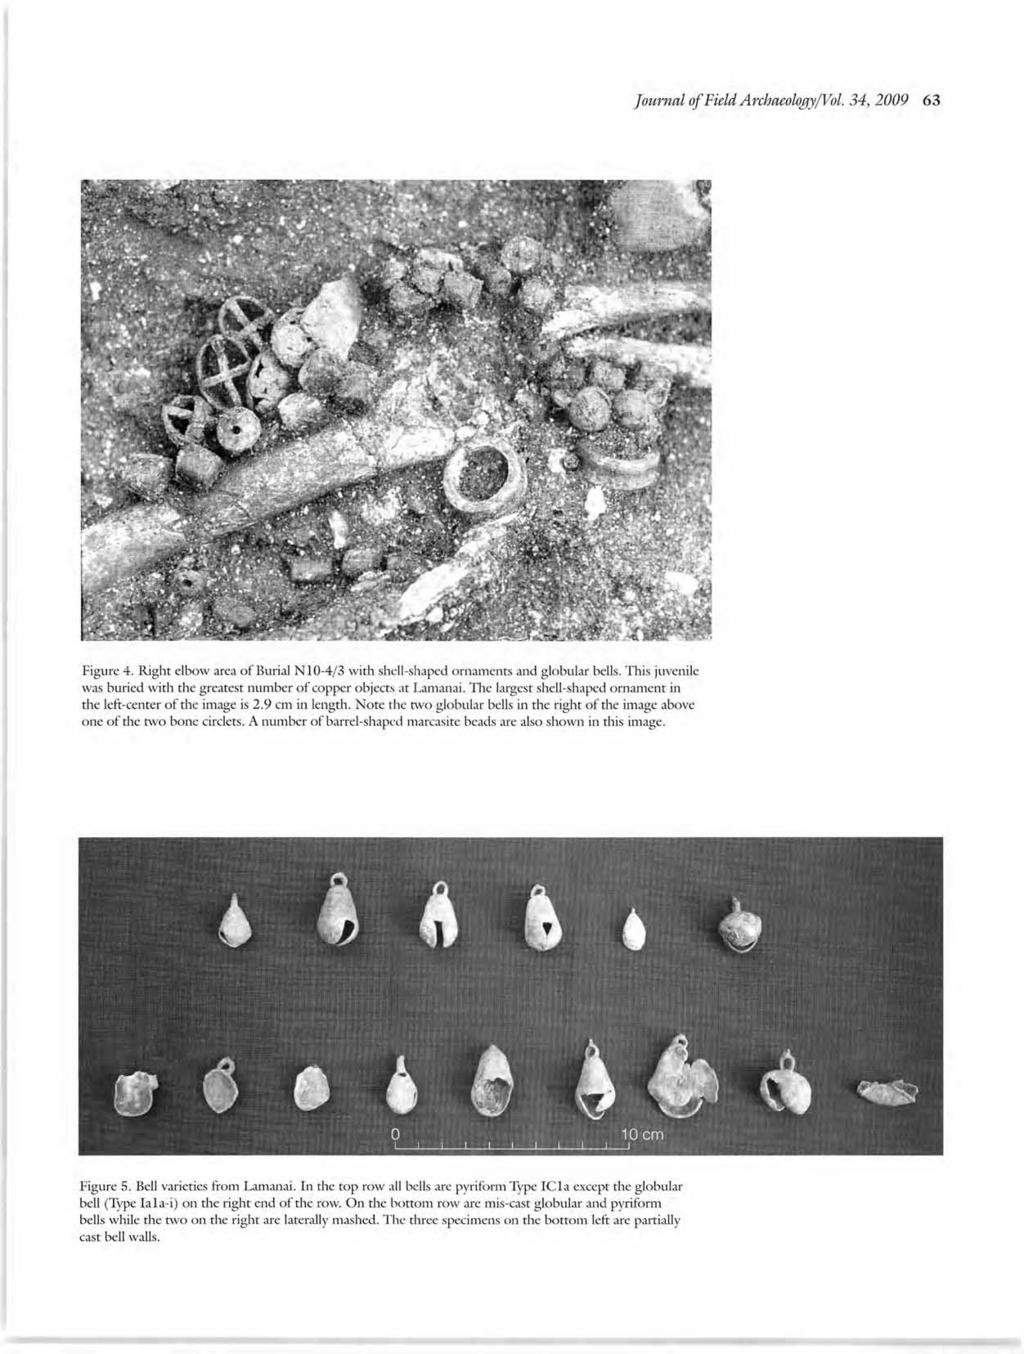 Journal of Field ArchaeologyjVol. 34) 2009 63 Figure 4. Right elbow area of Burial NlO-4j3 with shell-shaped ornaments and globular bells.